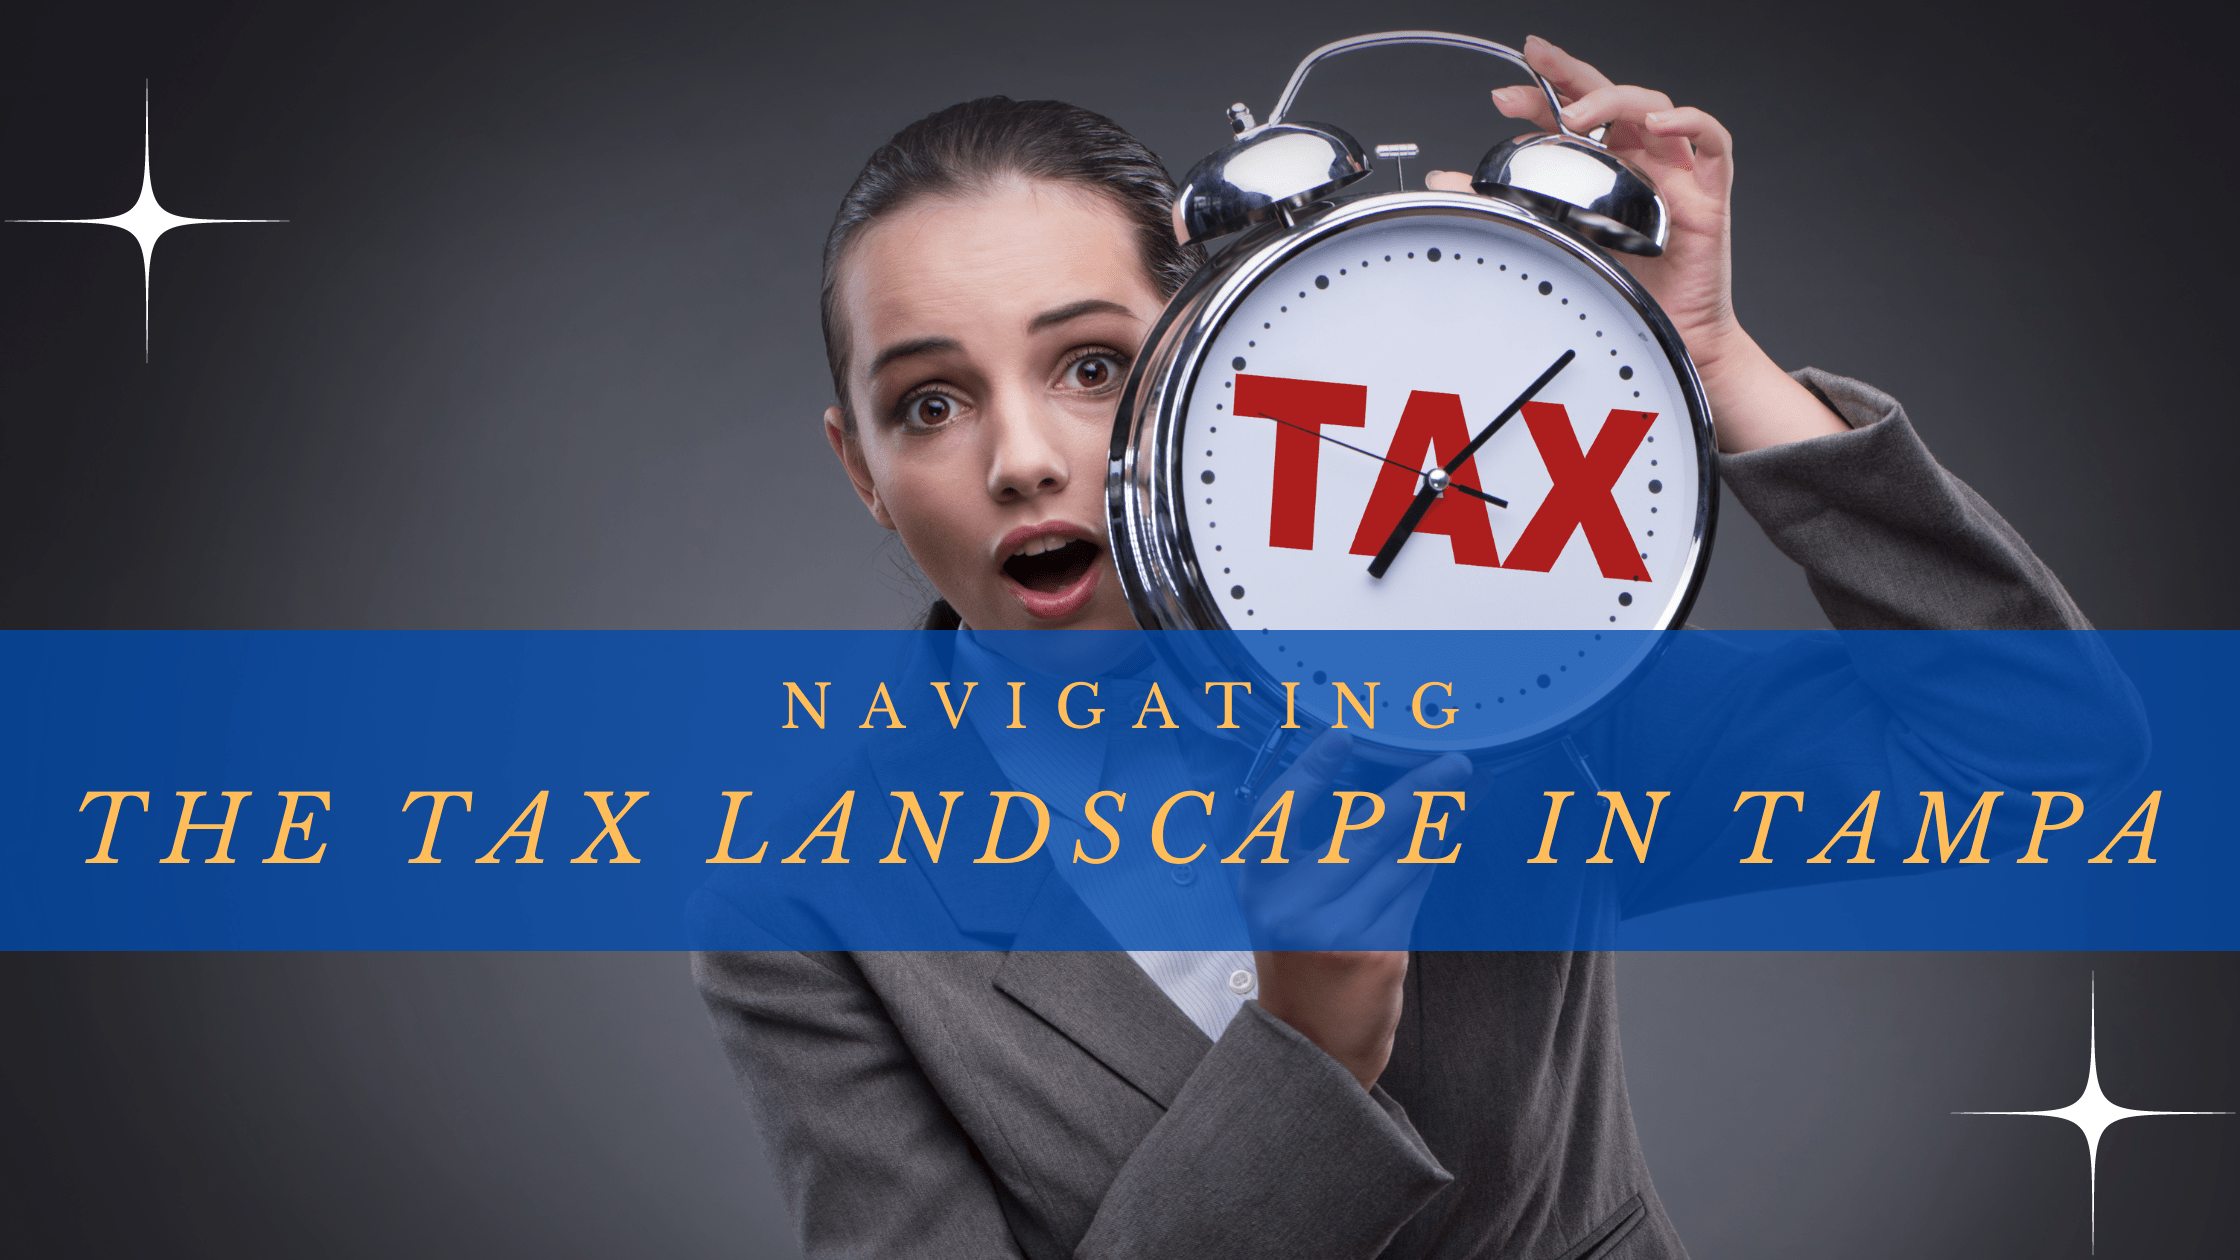 Navigating the Tax Landscape in Tampa